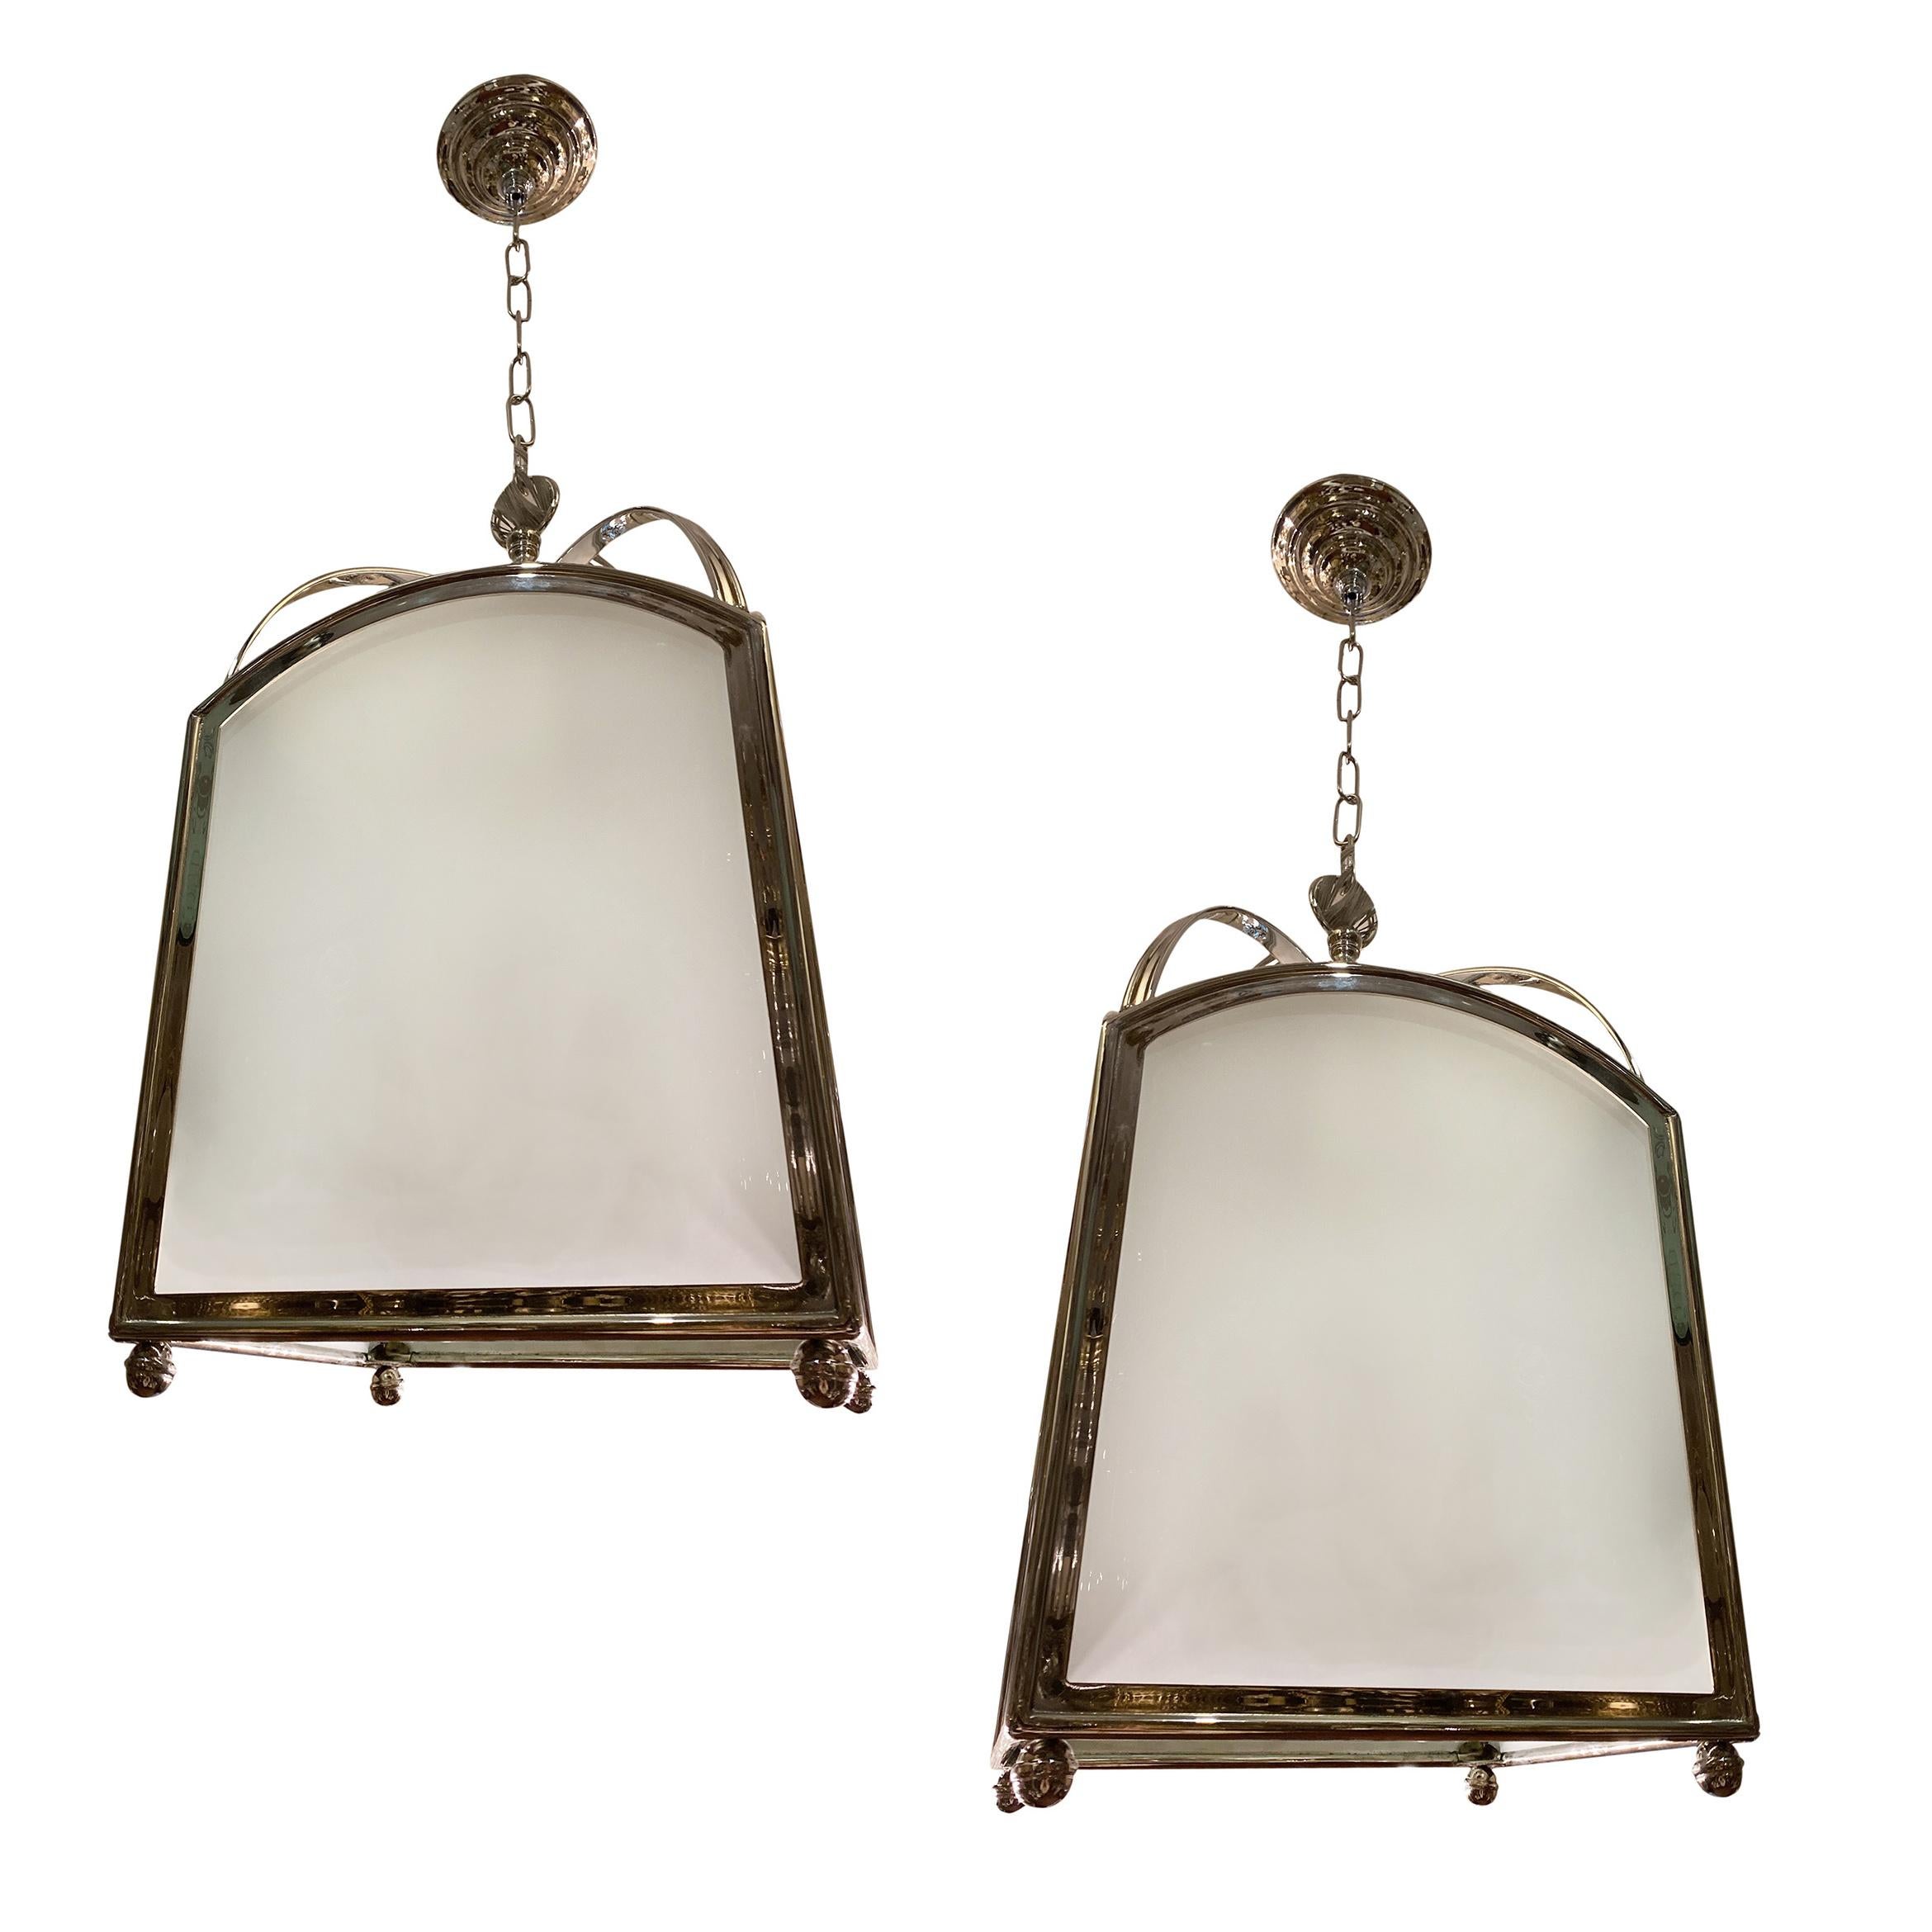 Pair of circa 1950s English silver-plated lanterns with four interior candelabra lights each and frosted glass insets. Sold individually.

Measurements:
Current drop 40